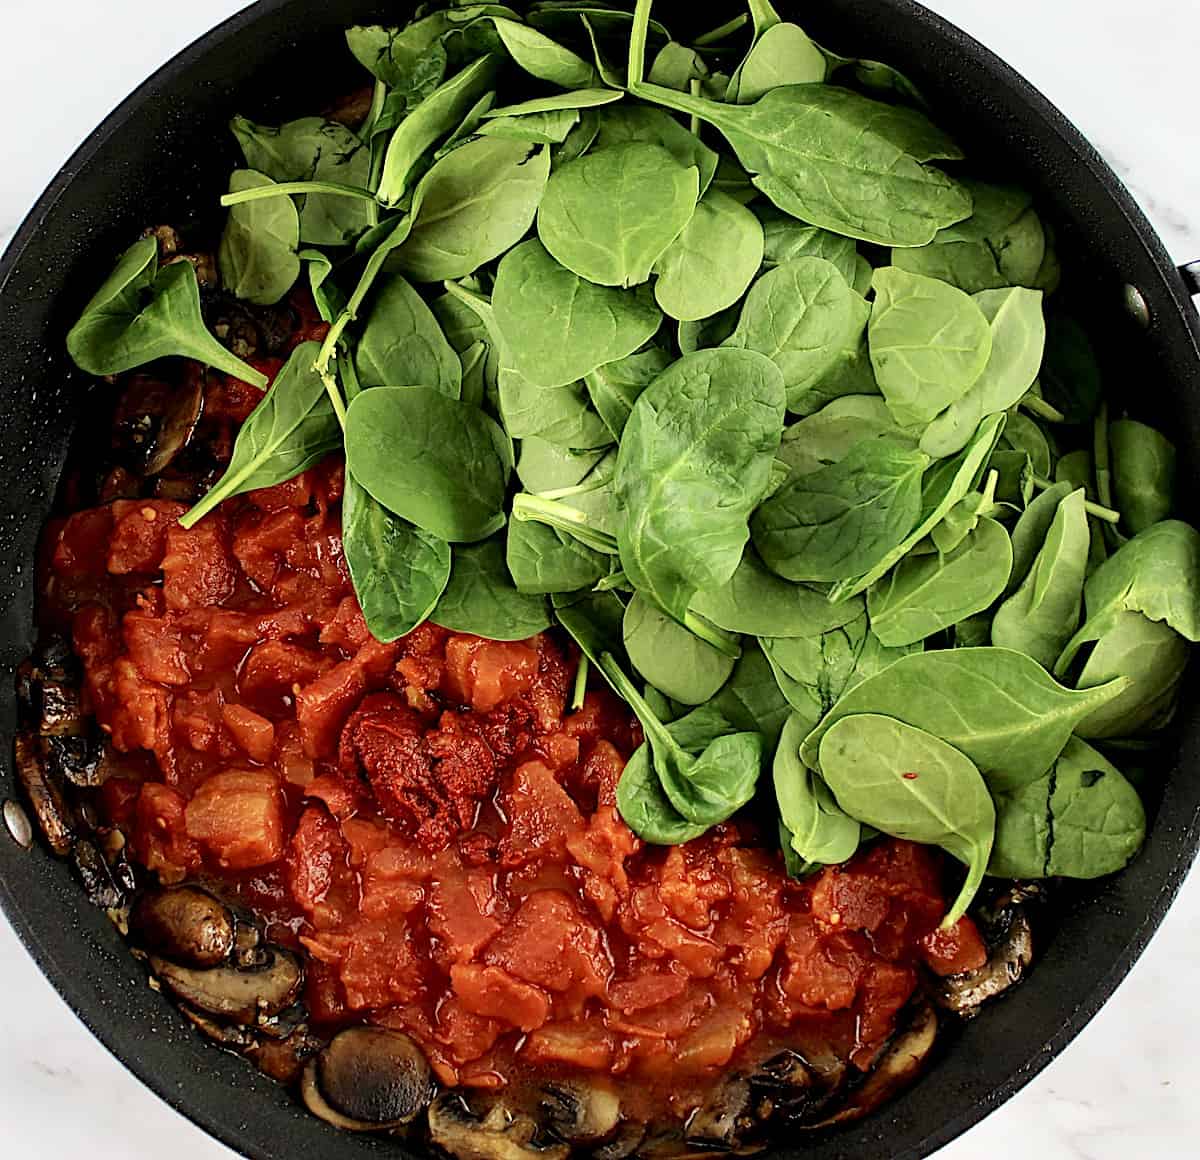 diced tomatoes and baby spinach in skillet